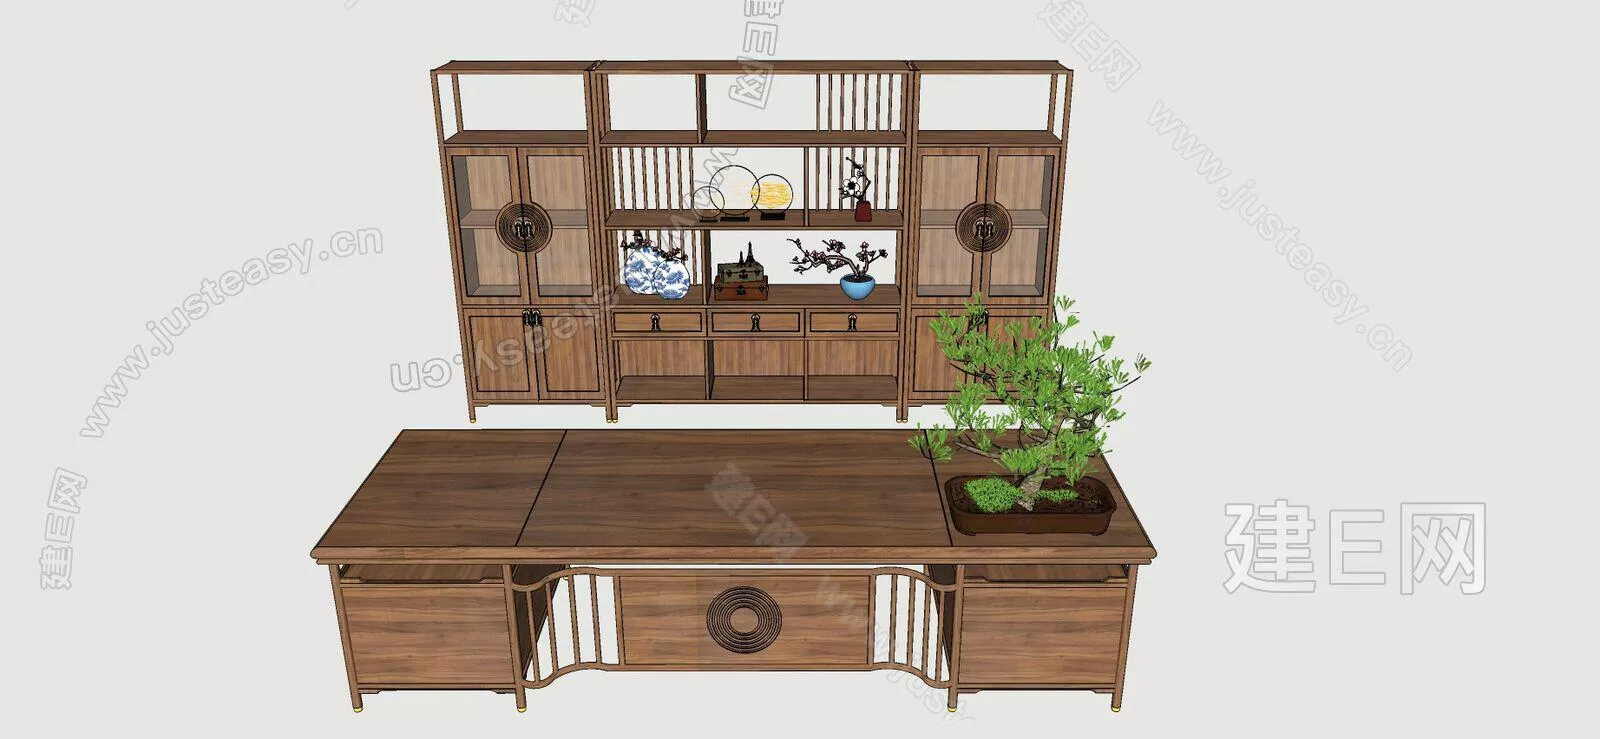 CHINESE DINING TABLE SET - SKETCHUP 3D MODEL - ENSCAPE - 111231381